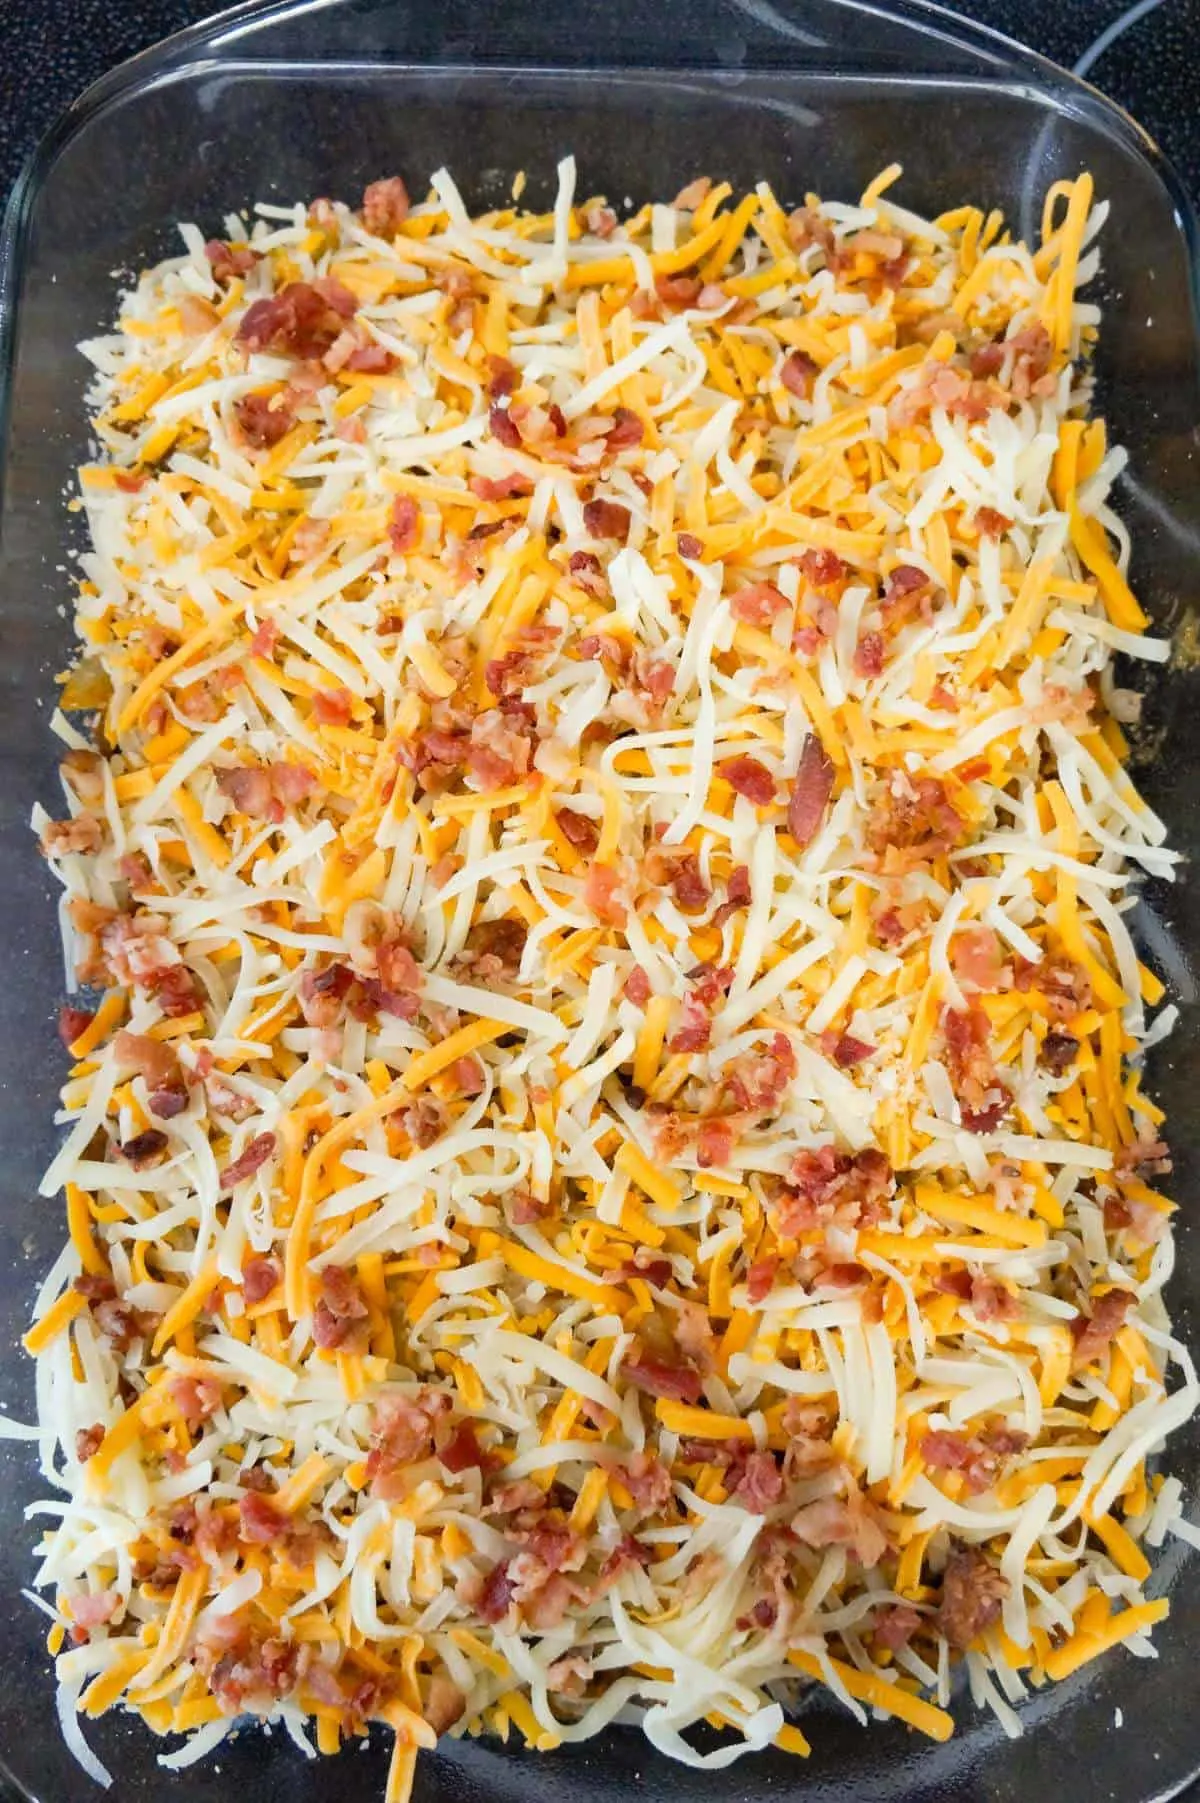 crumbled bacon and shredded cheese on top of cheeseburger casserole before baking